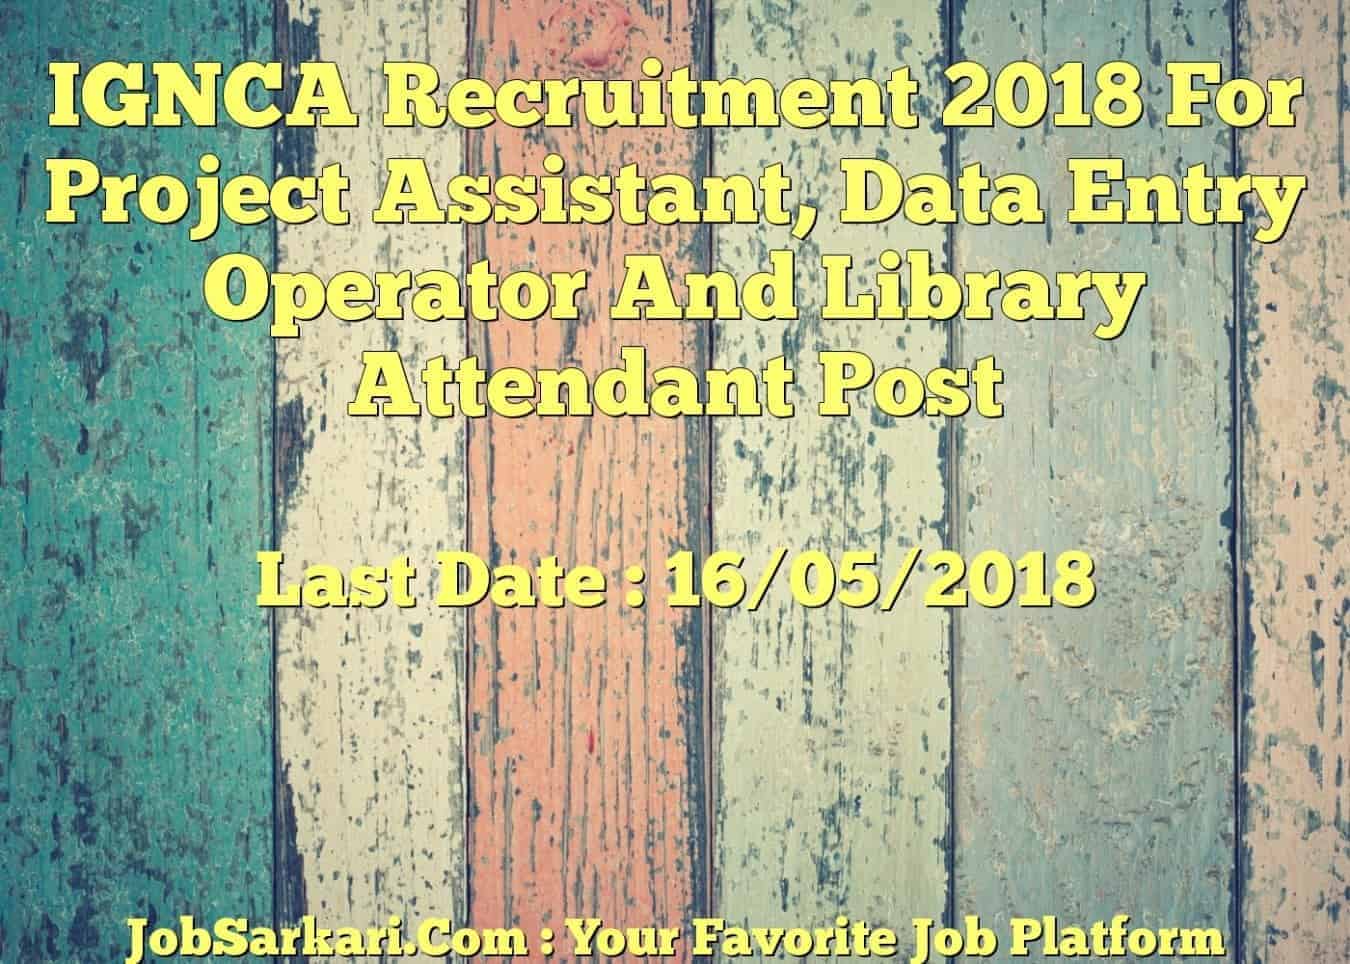 IGNCA Recruitment 2018 For Project Assistant, Data Entry Operator And Library Attendant Post